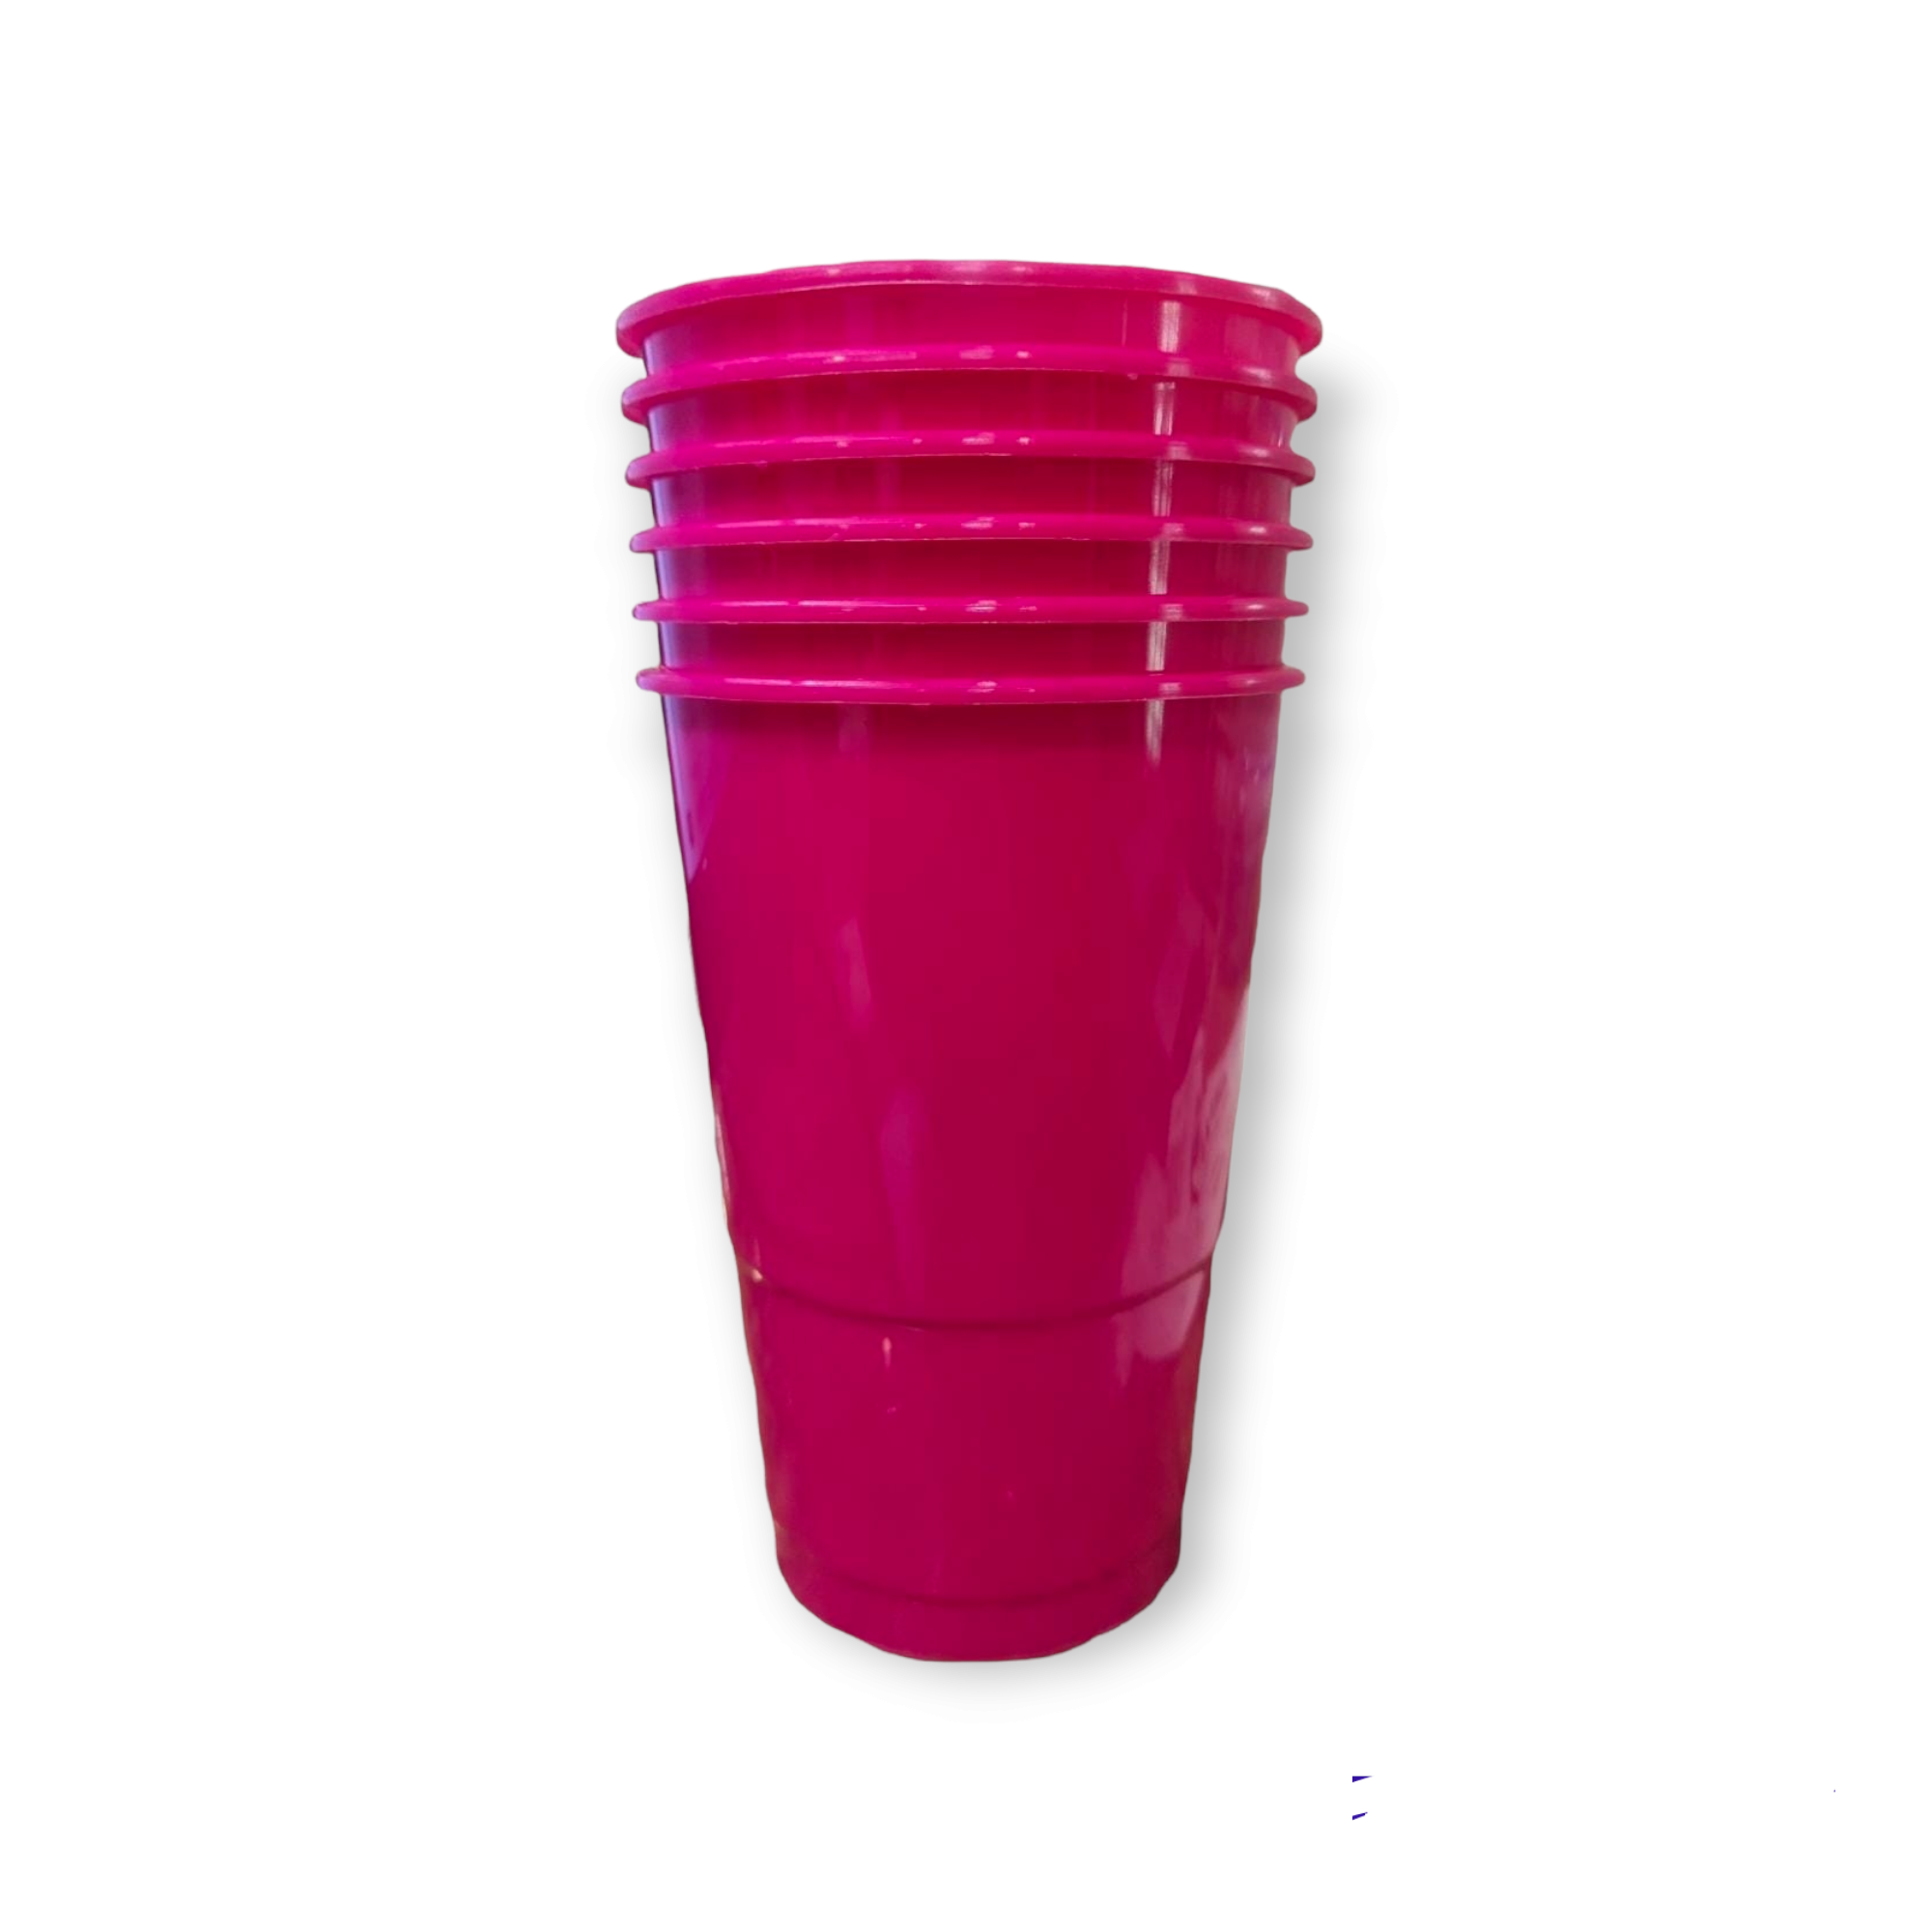 Plastic Tumbler 500ml Disposable Party Smoothie Cup Miss Molly Delicate 6pack Assorted